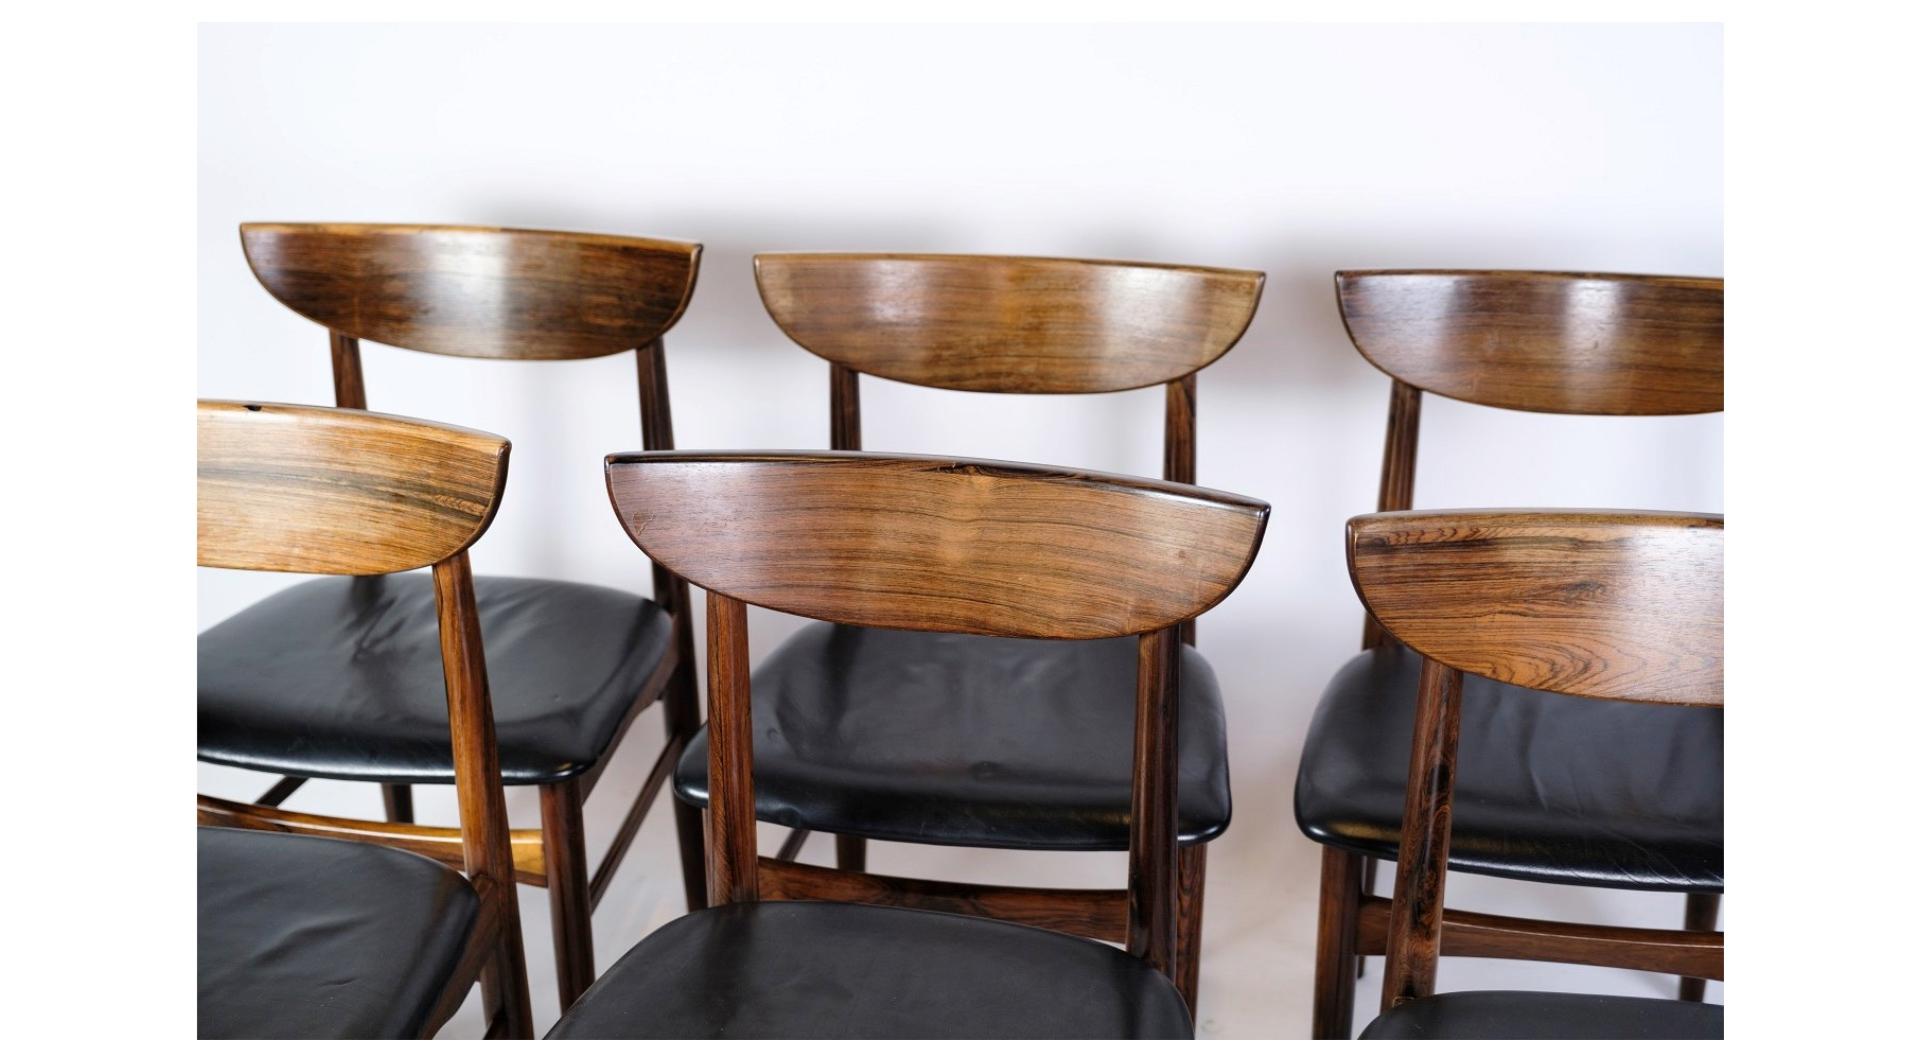 Danish design from the 1960s, this set of six dining table chairs combines the rich allure of rosewood with the timeless sophistication of black leather upholstery.

Crafted with meticulous attention to detail, these chairs exude a sense of